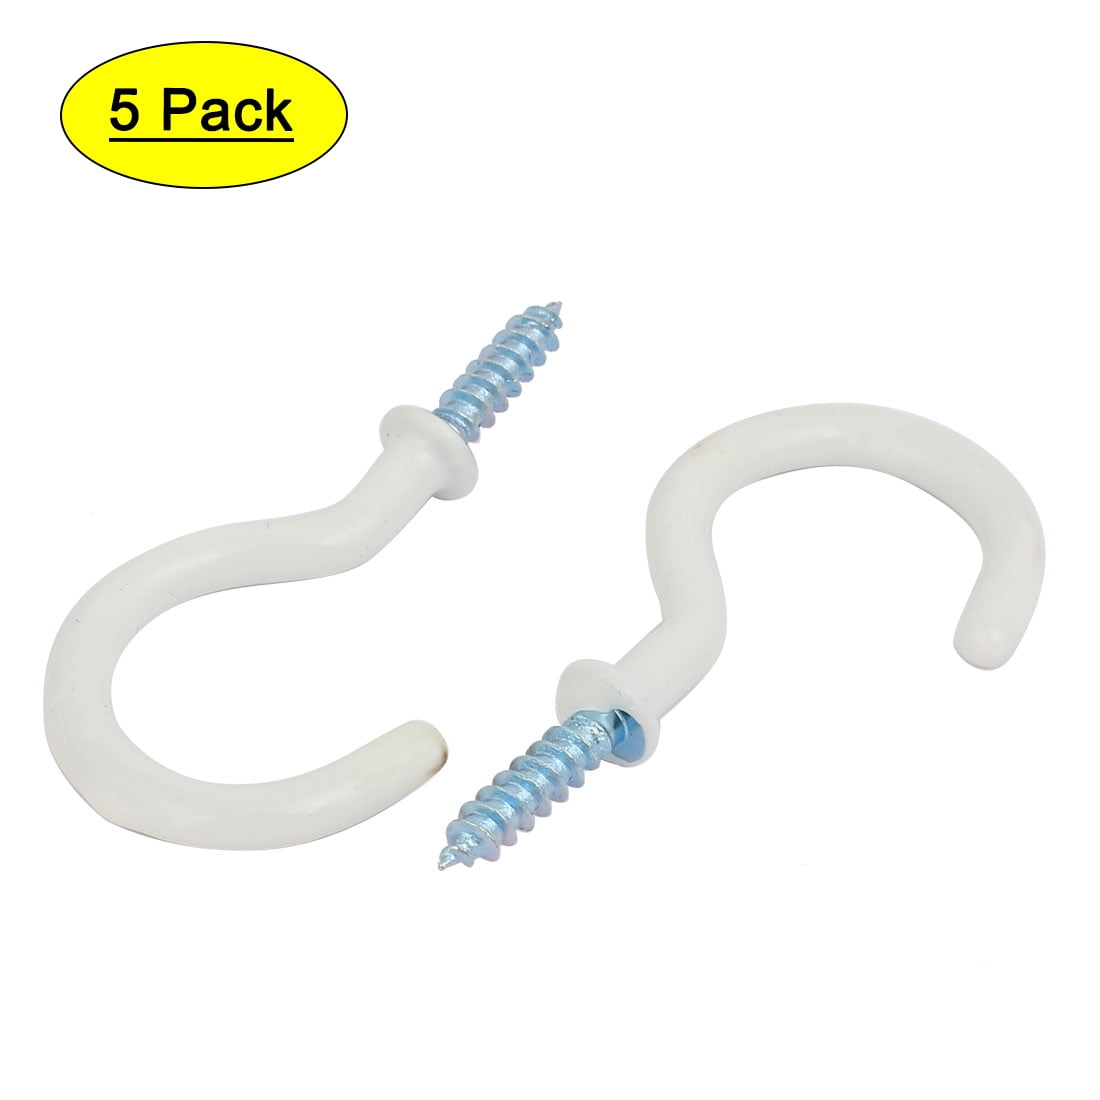 Pack of 6 Set of 6 Pieces Merriway BH04764 Cup Hook White Plastic Coated 25 mm